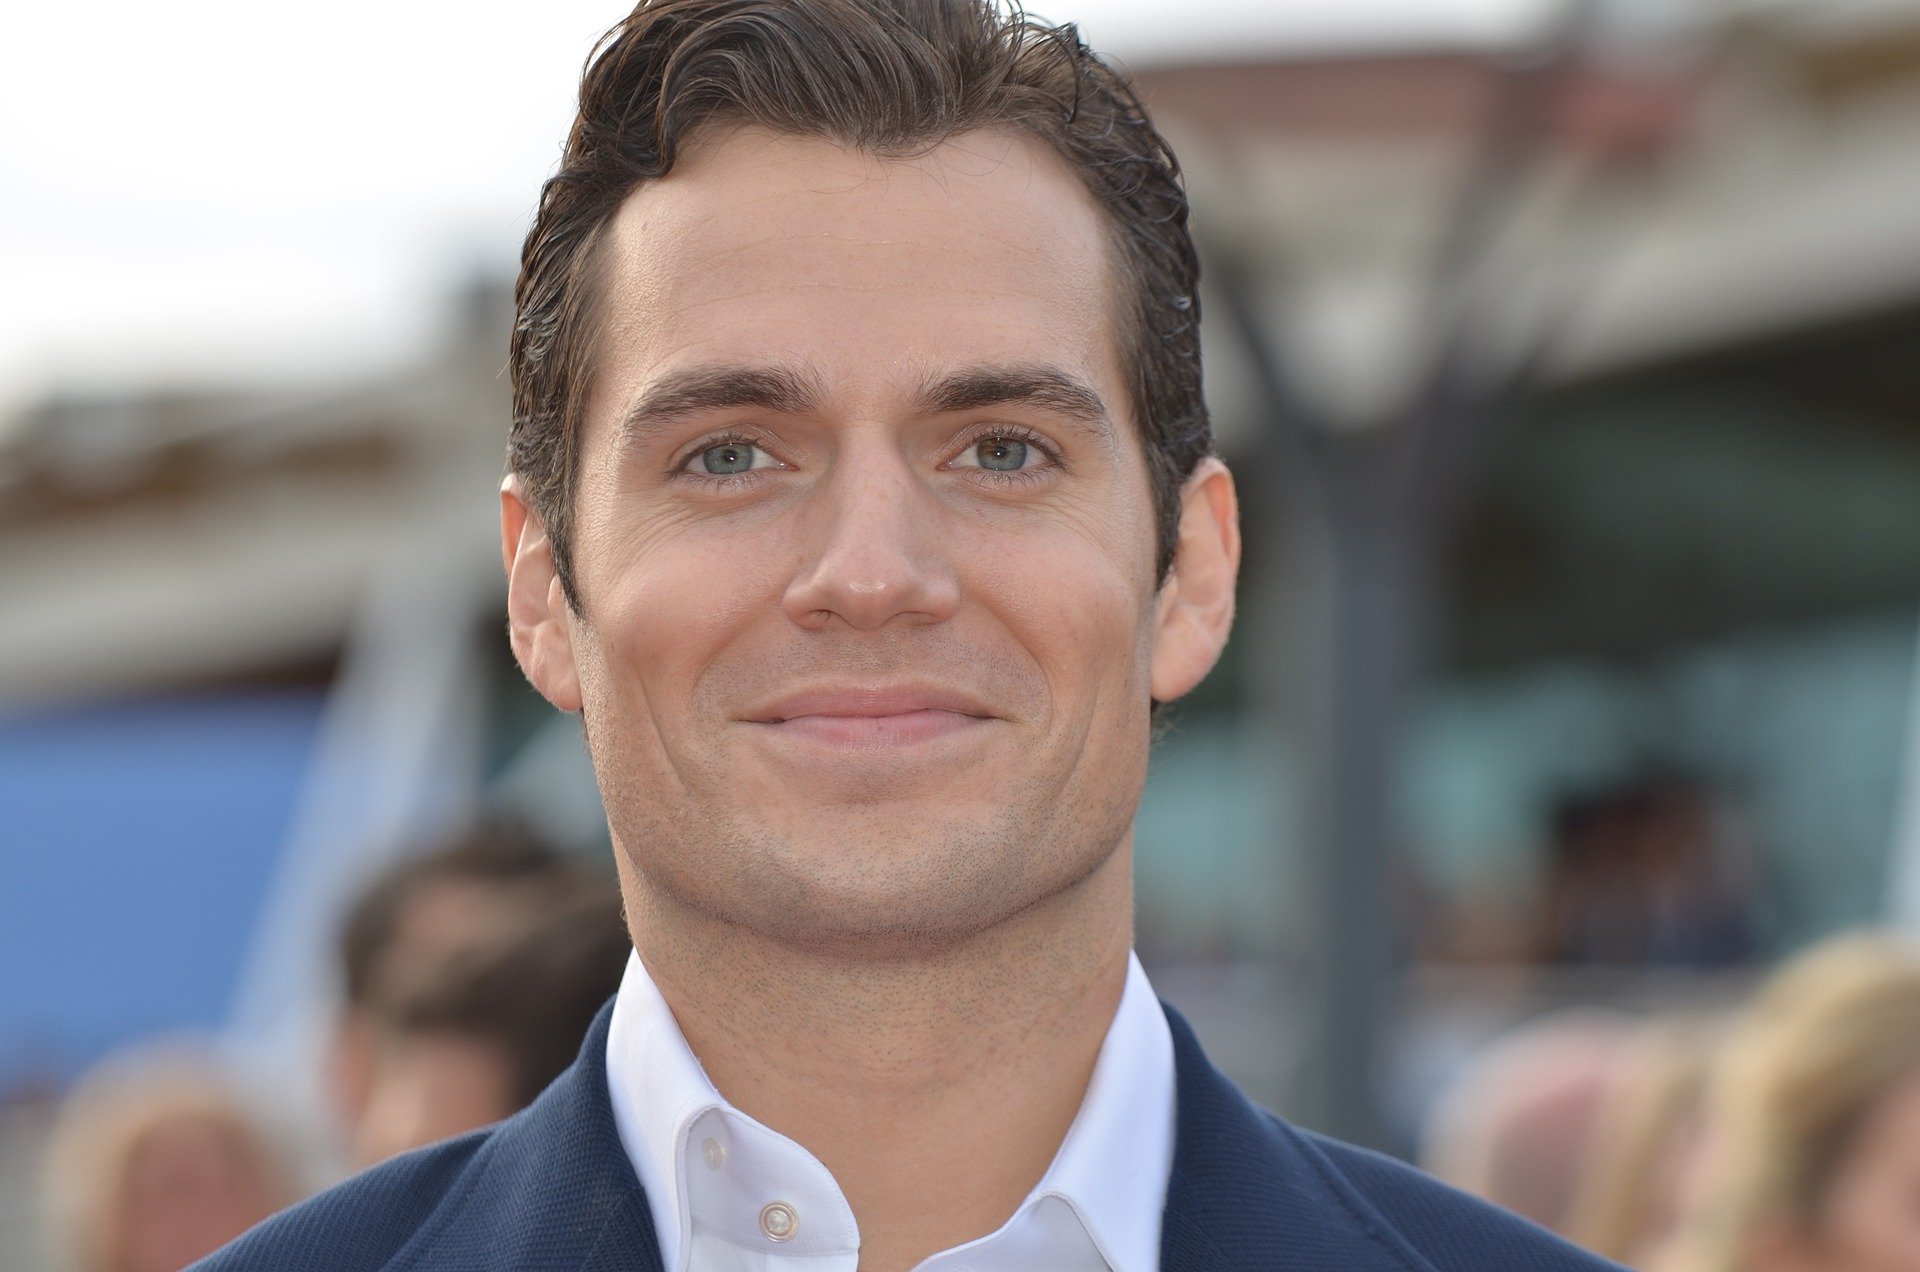 Henry Cavill on 'The Witcher' season 2: My career could have been over